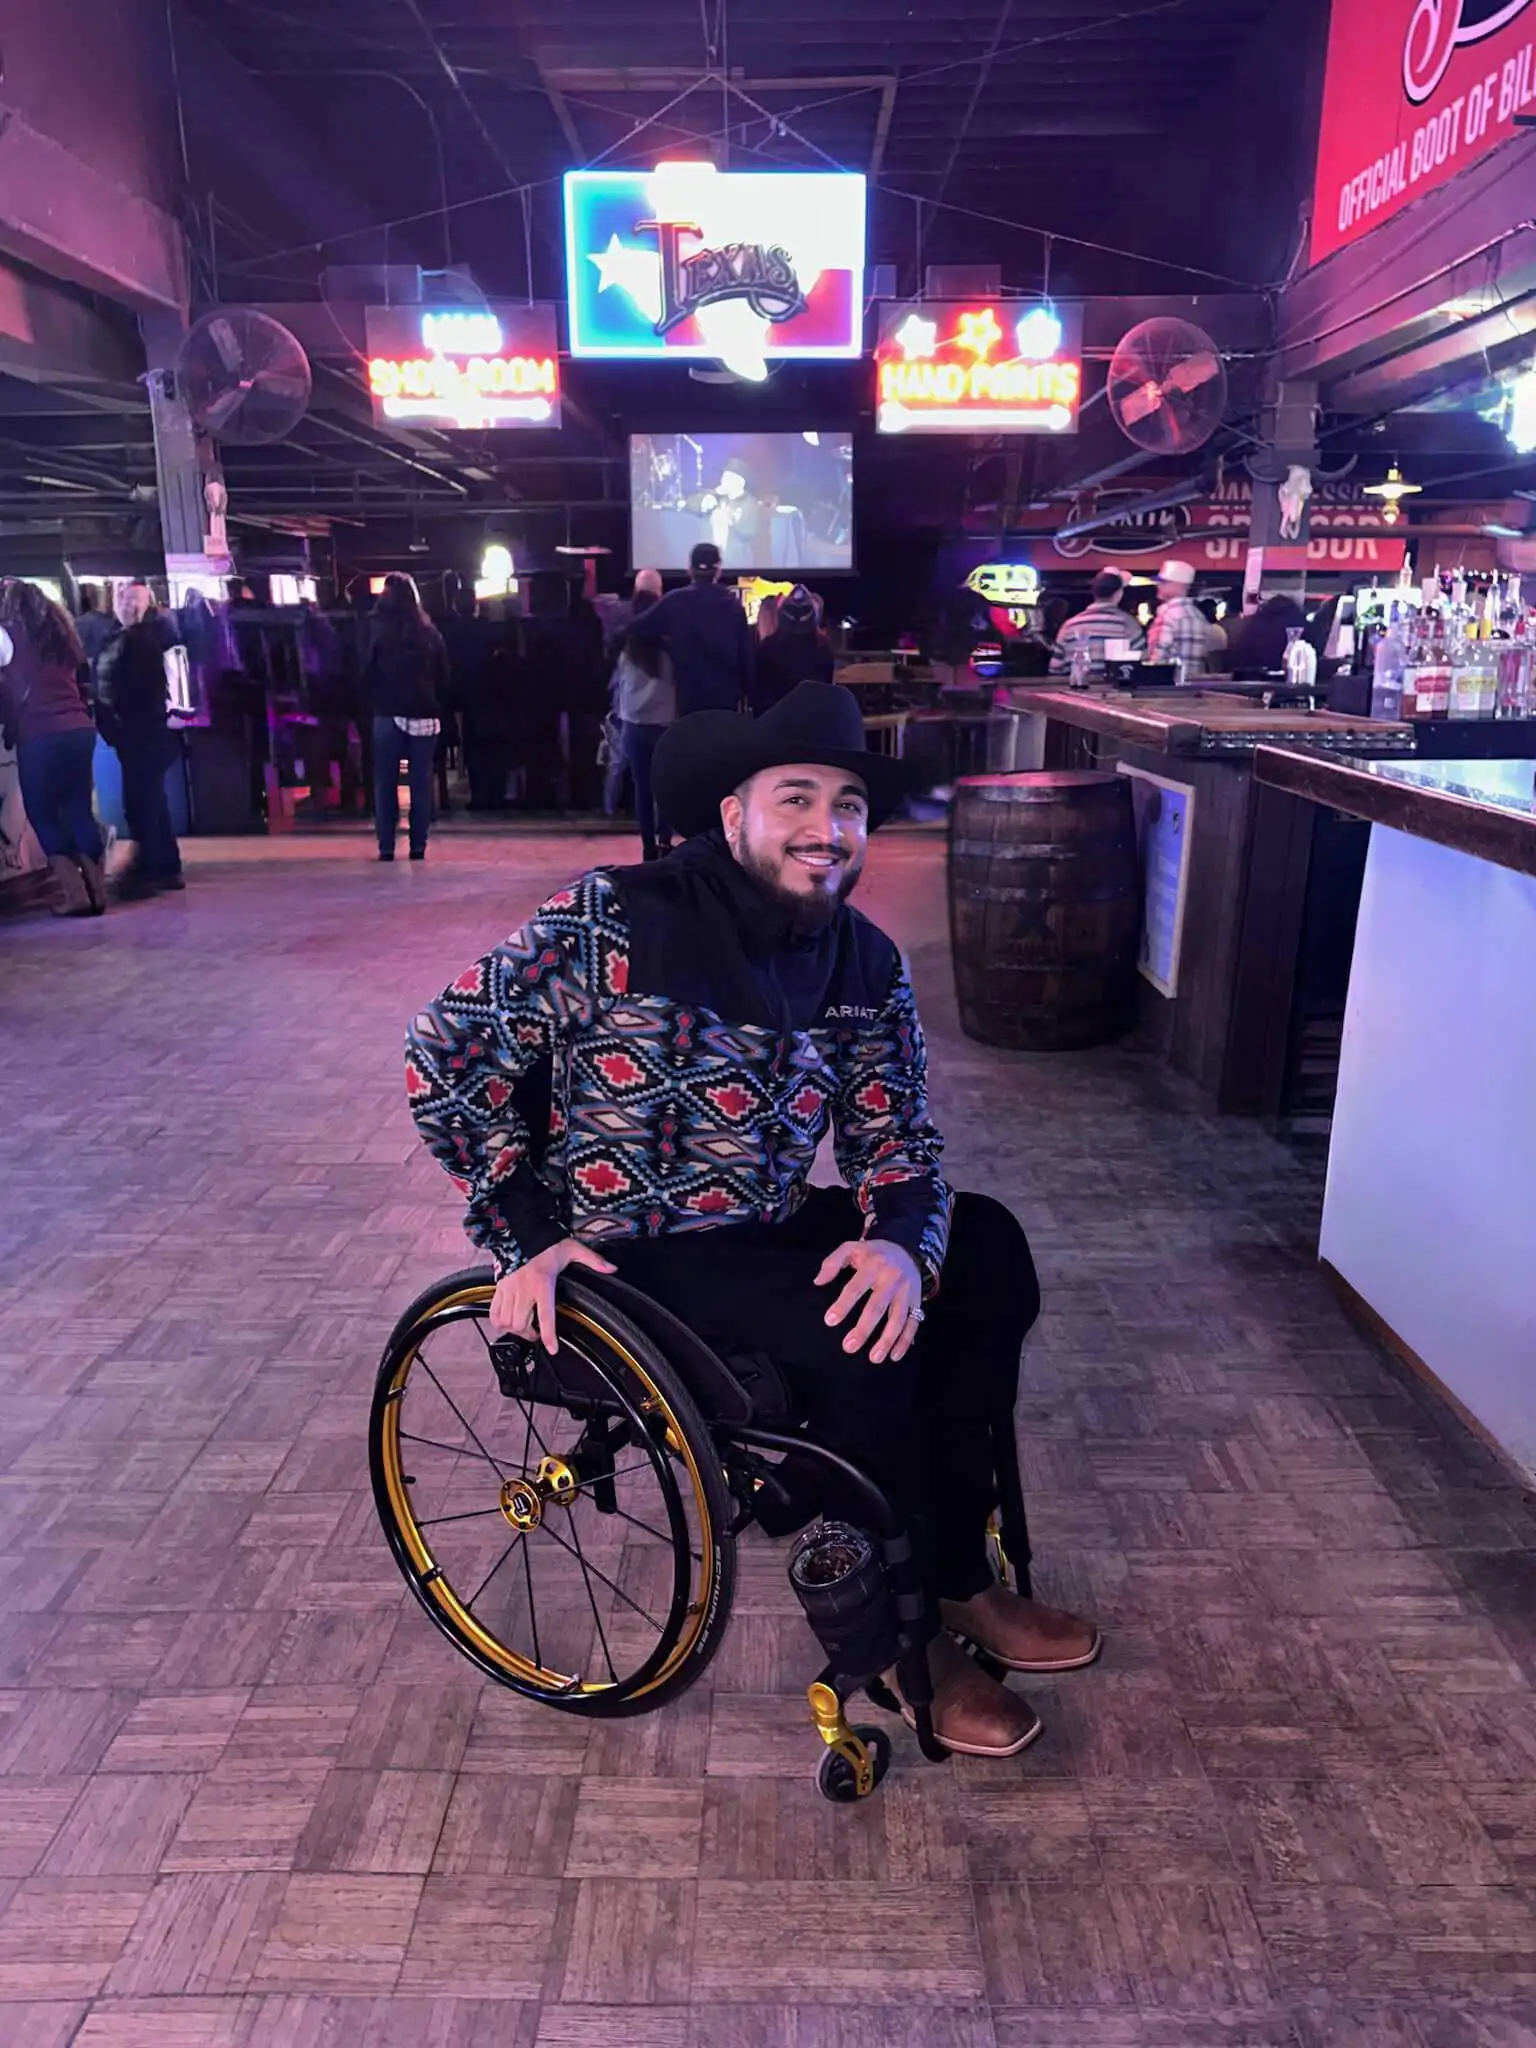 A picture of Anthony Sanchez out on the town, in the famous Fort Worth venue known as Billy Bobs. Dressed in a black cowboy hat, a black puffy jacket, and black jeans with holes over the knee, he's ready to show that being disabled doesn't mean you can't live a good life. Also, in the background, various fixtures of Billy Bobs can be seen out of focus, including a bar and the neon sign of the logo.